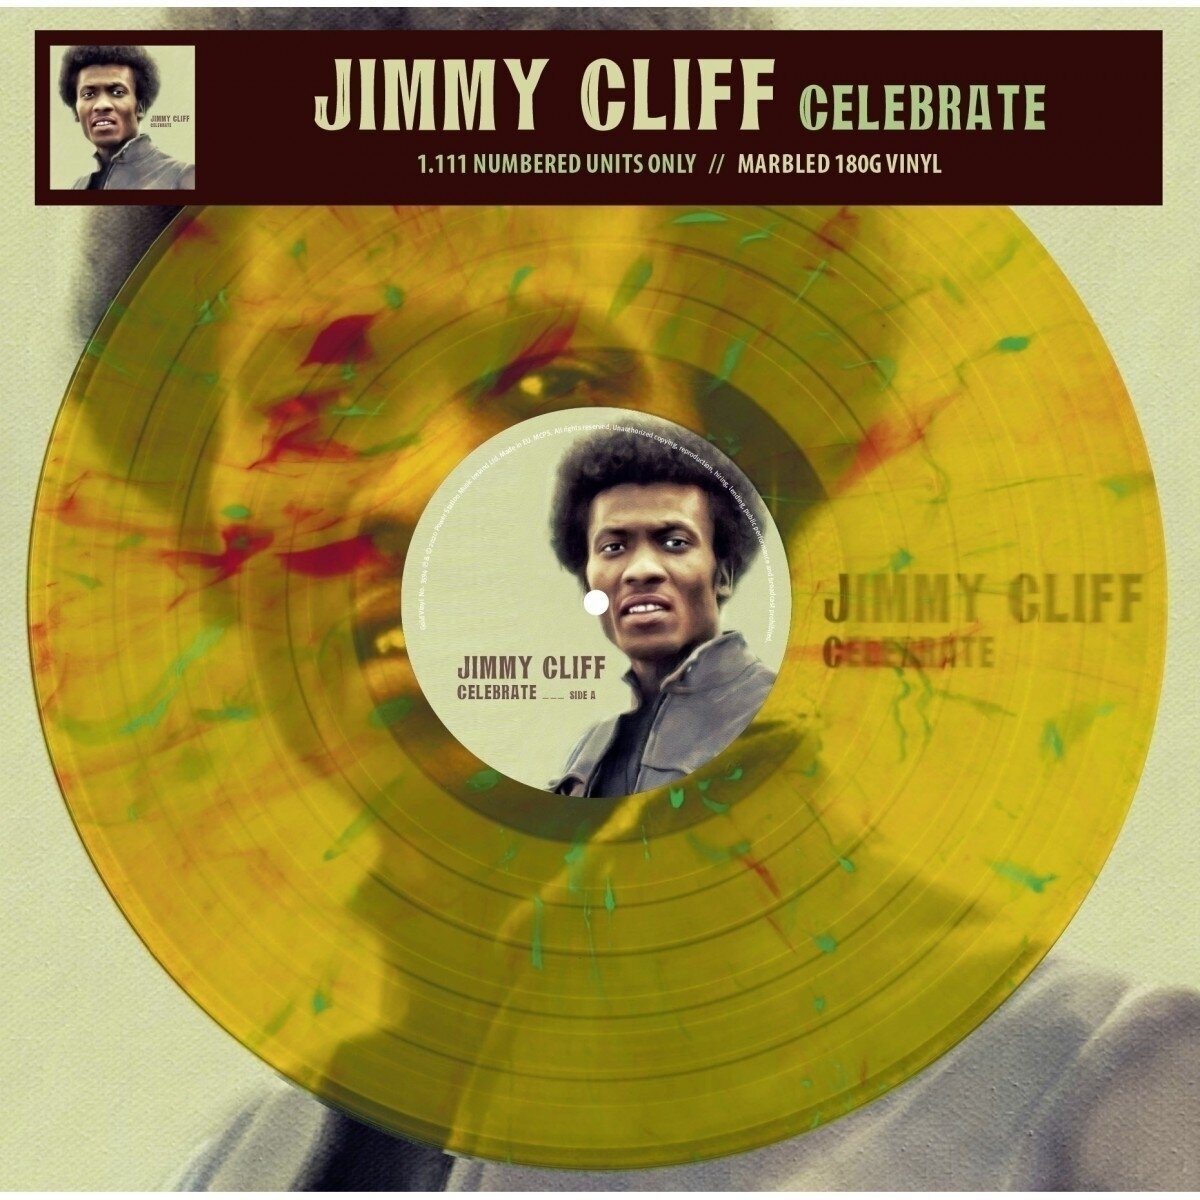 Disco de vinil Jimmy Cliff - Celebrate (Limited Edition) (Numbered) (Marbled Coloured) (LP)